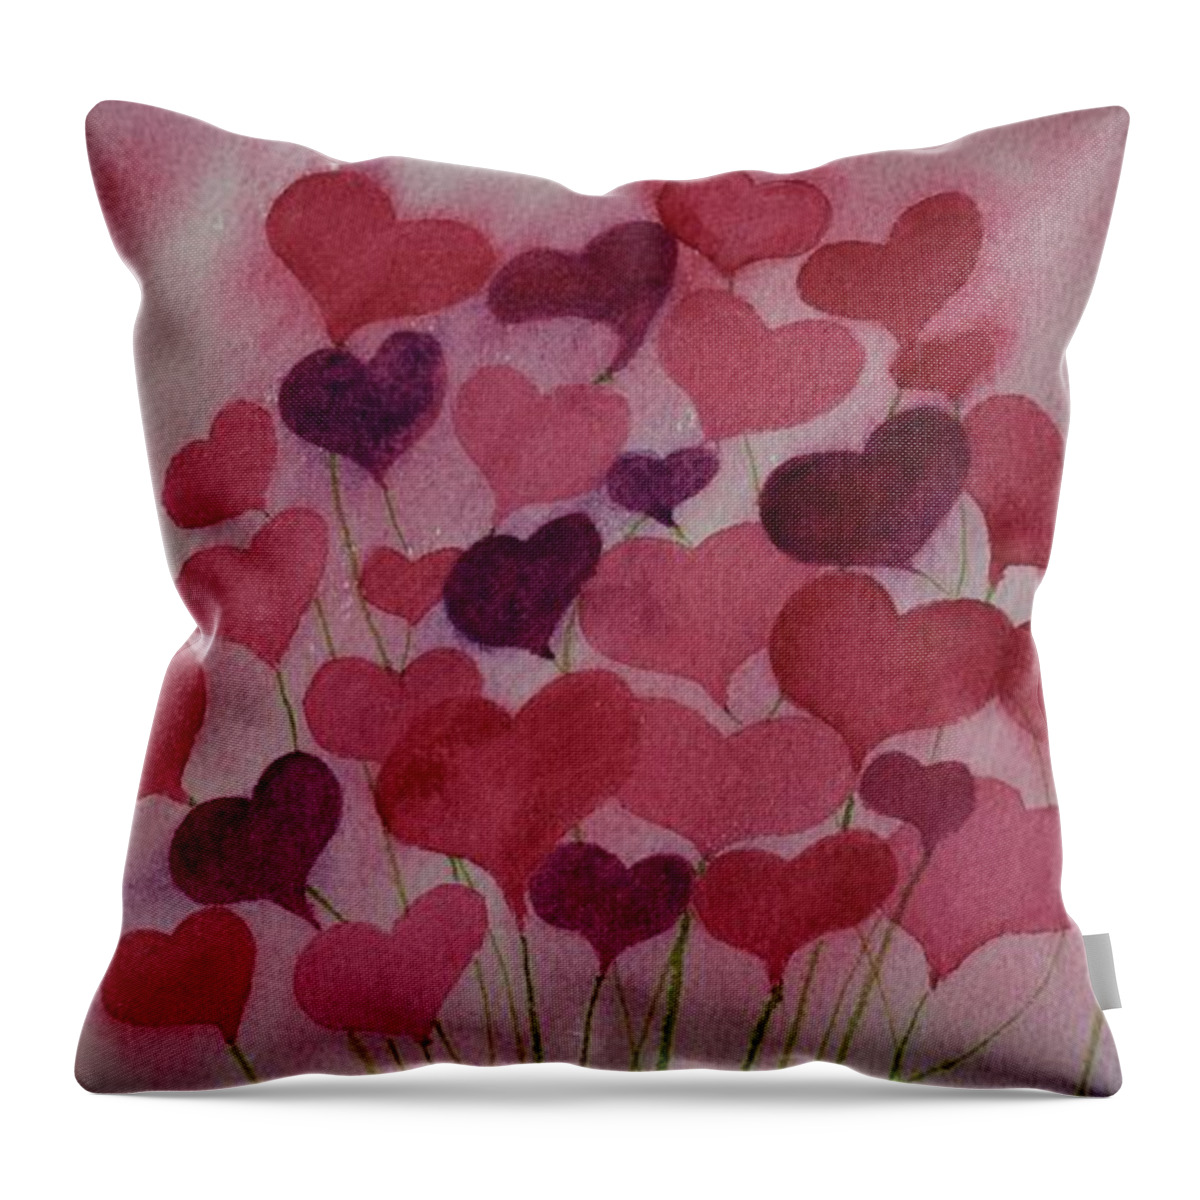 Barrieloustark Throw Pillow featuring the painting Growing Love by Barrie Stark